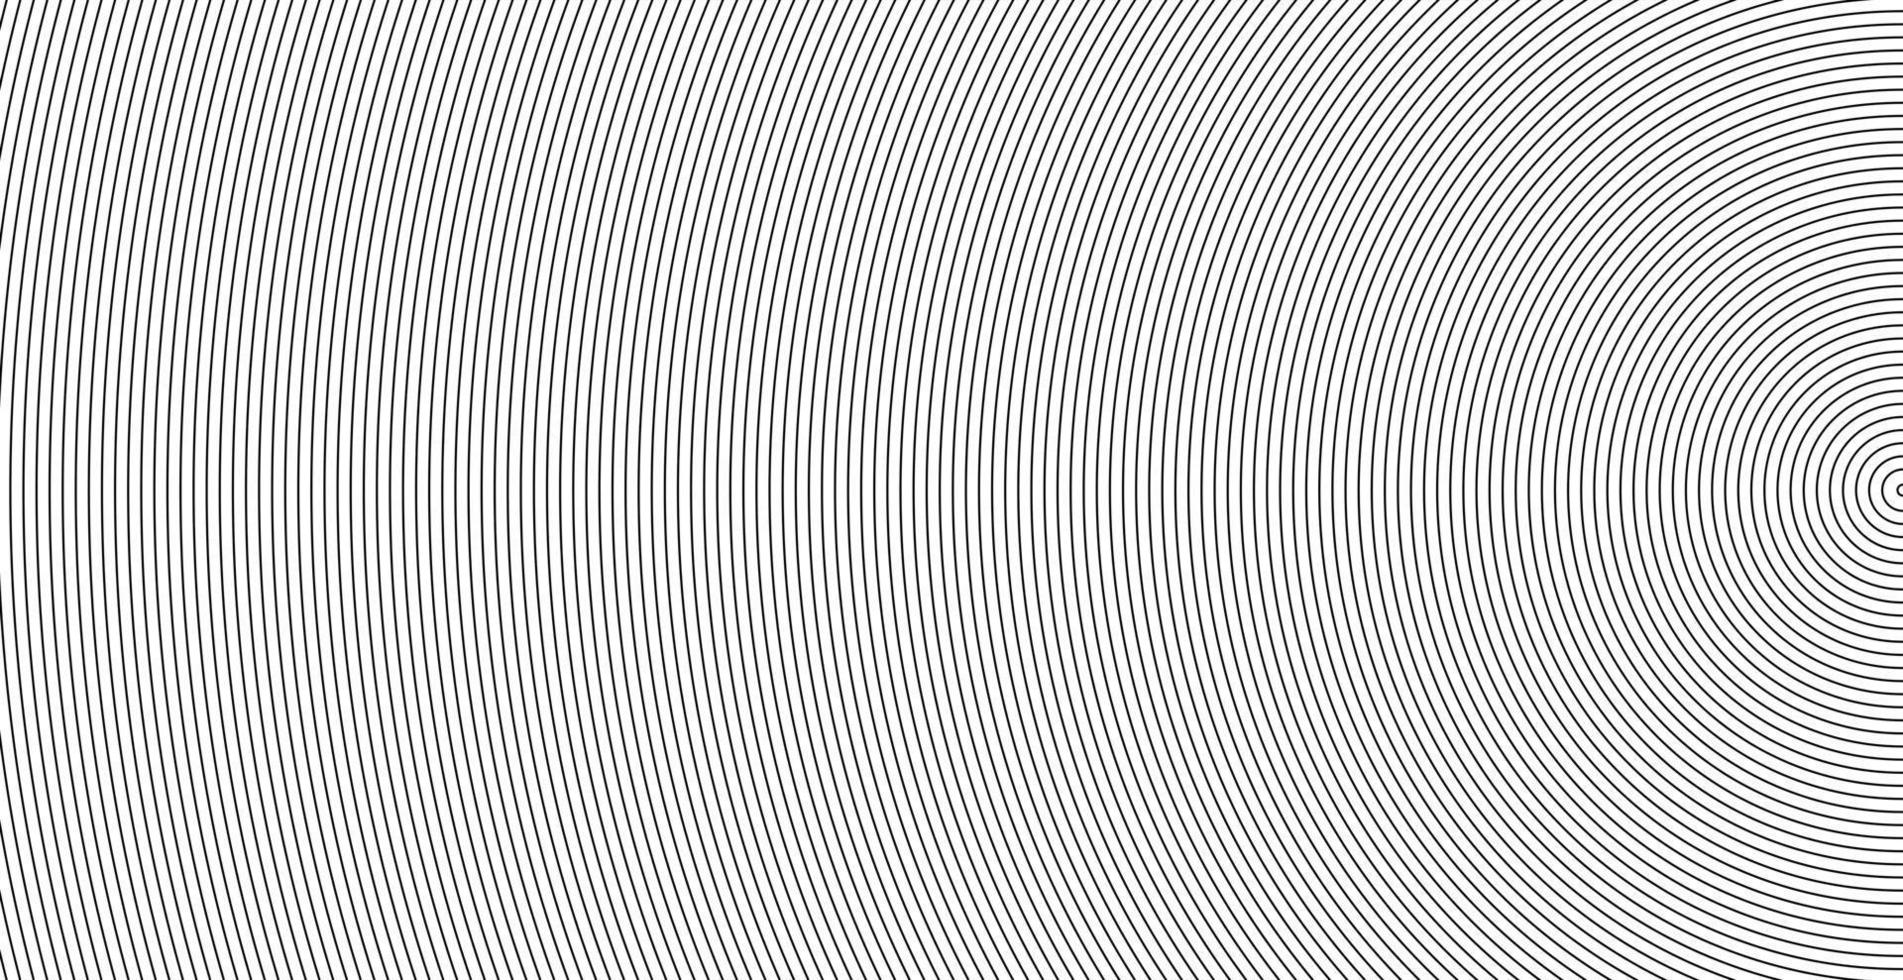 Abstract circle halftone background vector